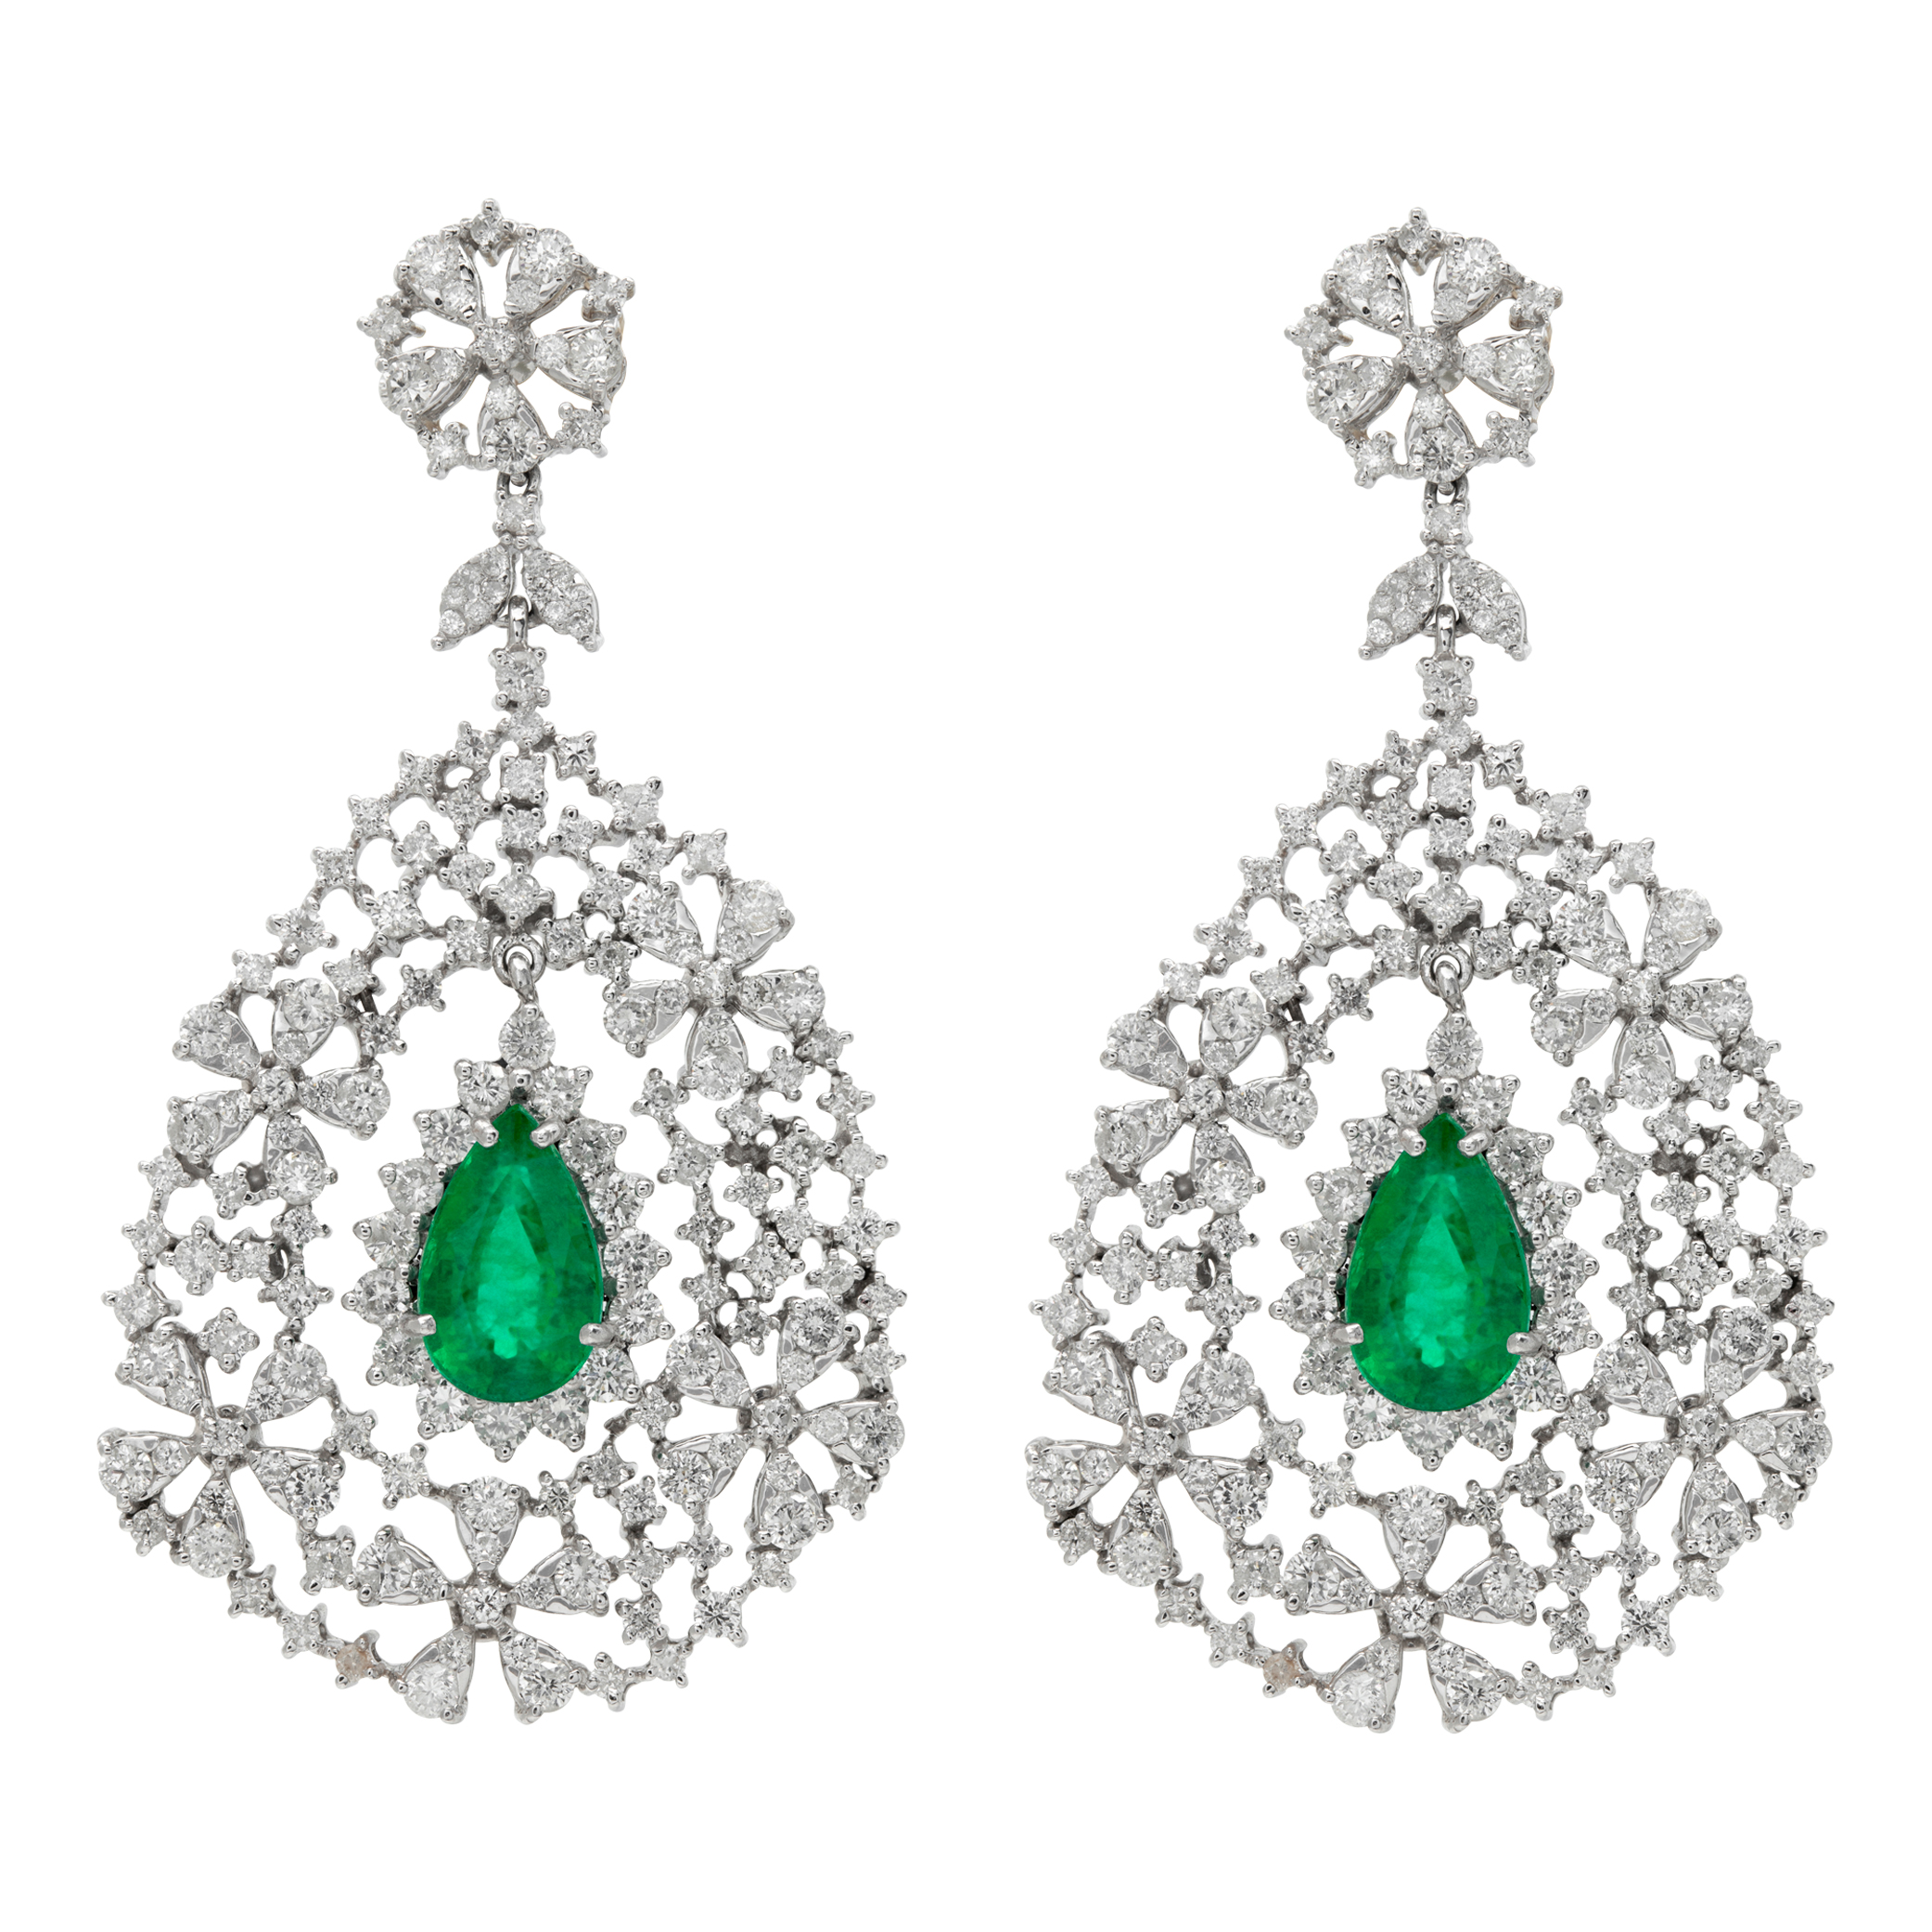 Diamonds and Pear shape Emeralds dangling earrings in 18K white gold. Diamonds approx. weight: 5.00 carats. Emeralds:approx weight: 4 carats